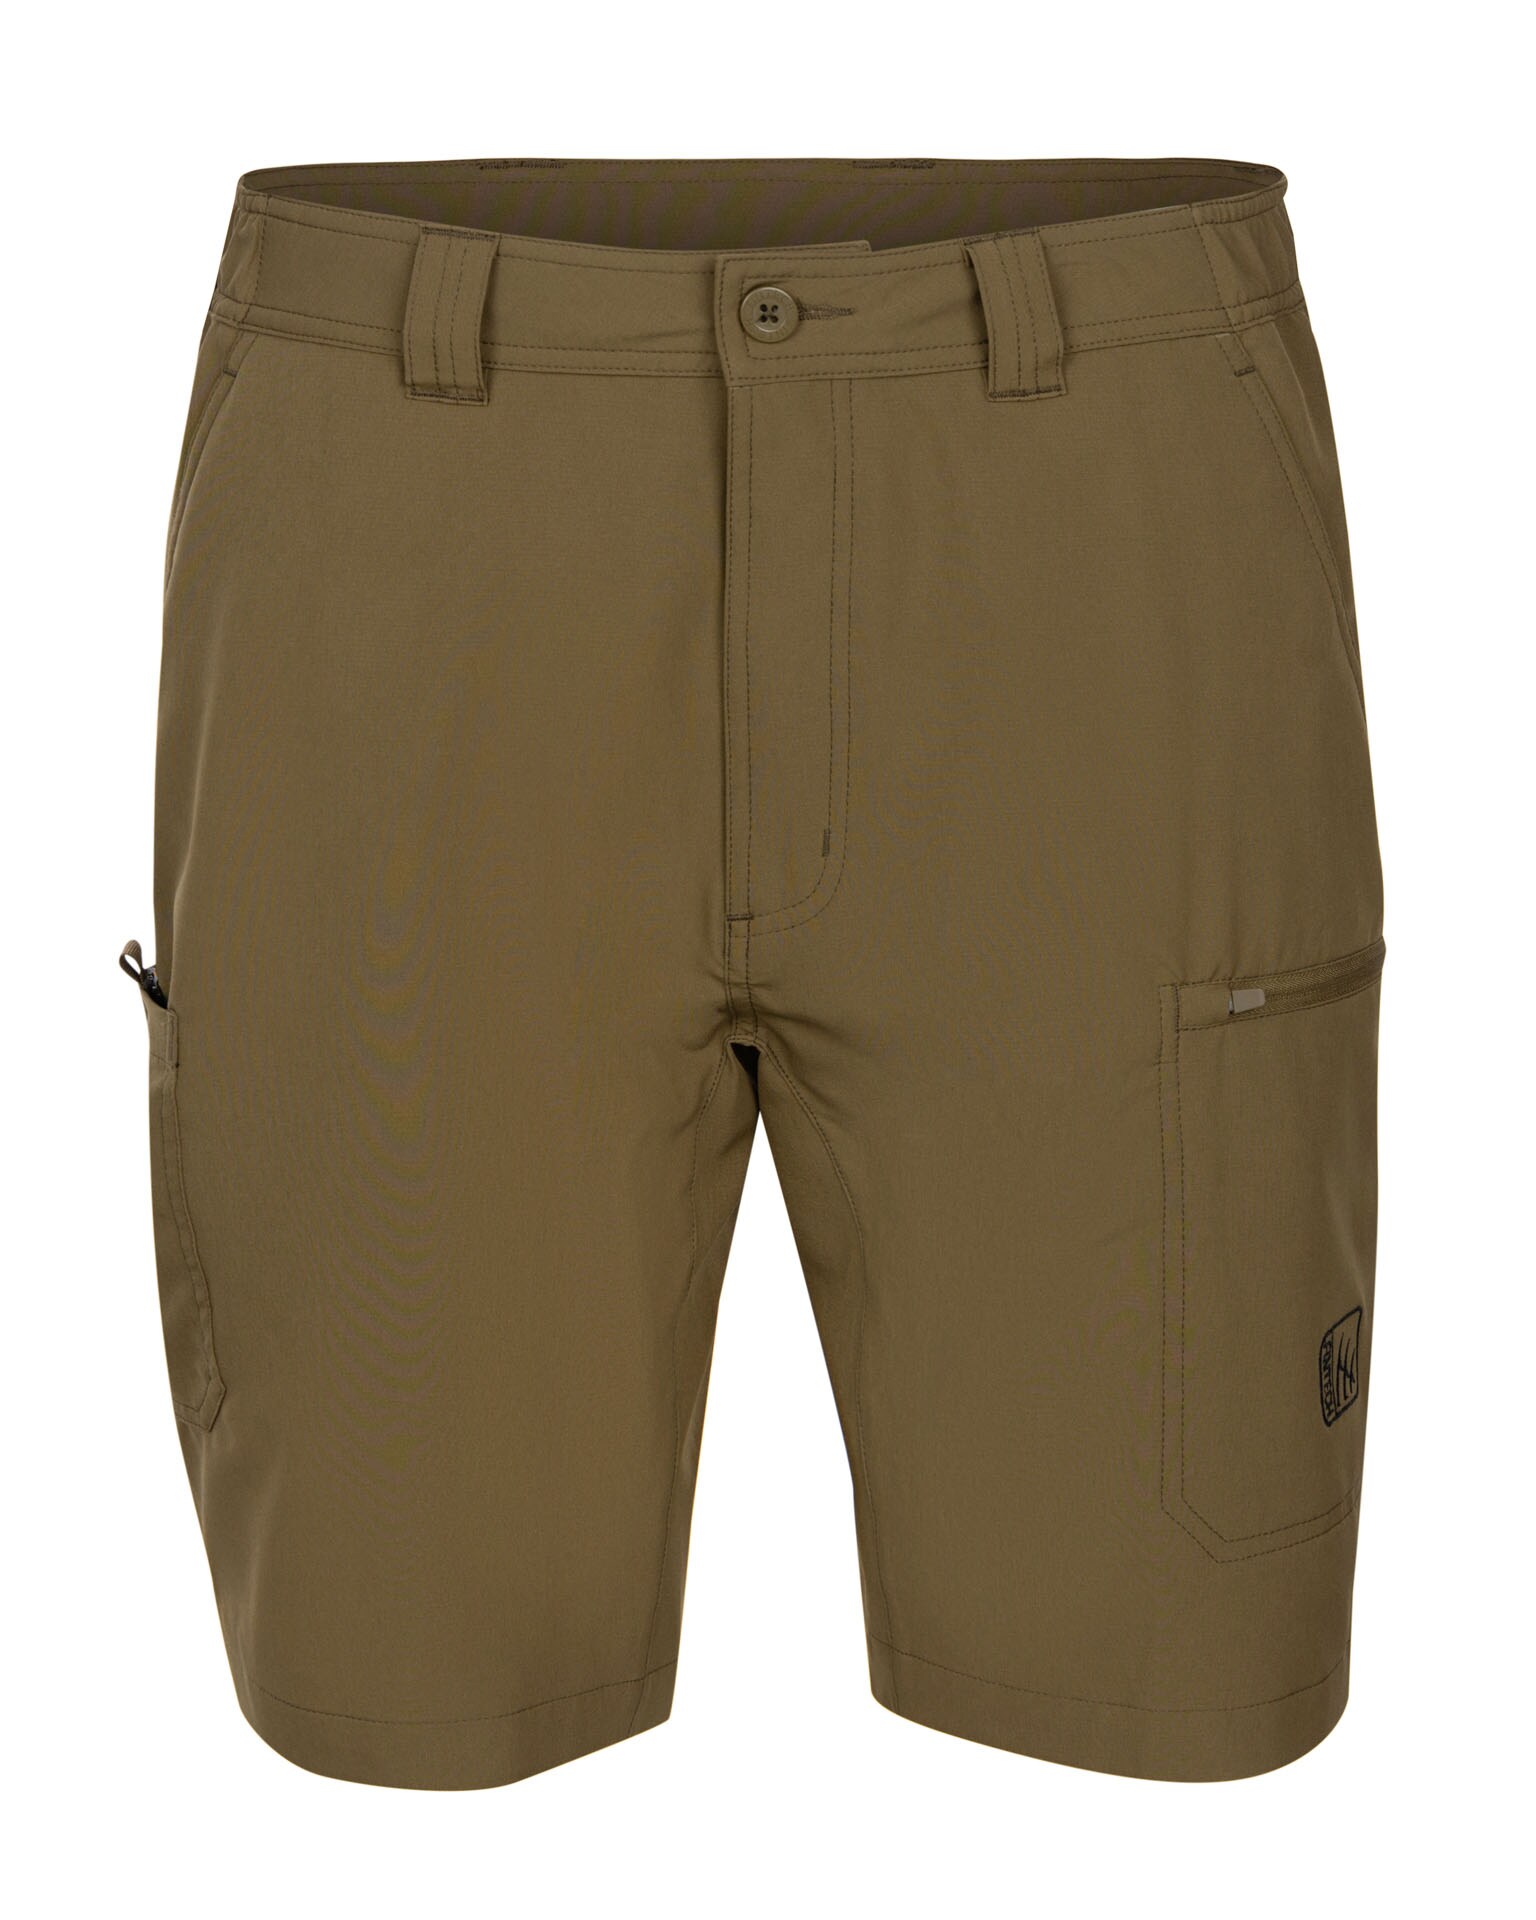 Shorts For Men: How Short Is Too Short? - Lowes Menswear